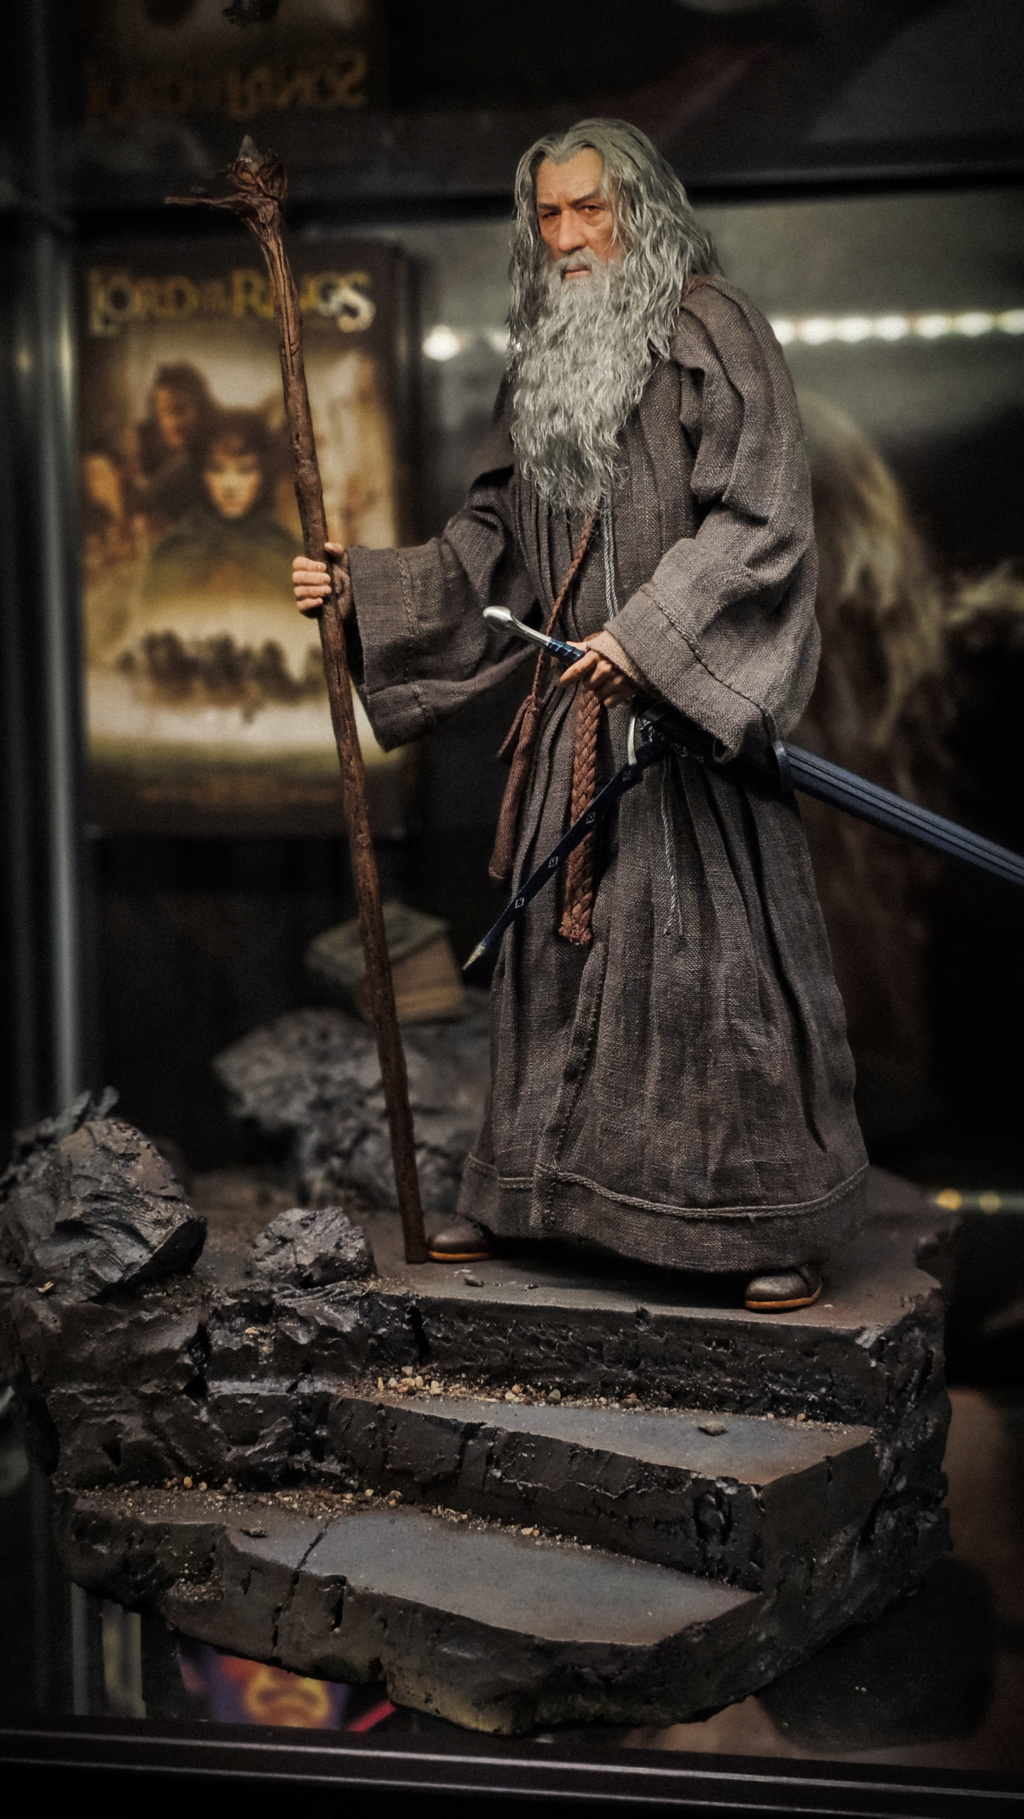 LordoftheRings - NEW PRODUCT: Queen Studios & INART: 1/6 The Lord of the Rings Gandalf (Grey Robe) Action Figure - Page 4 47715710